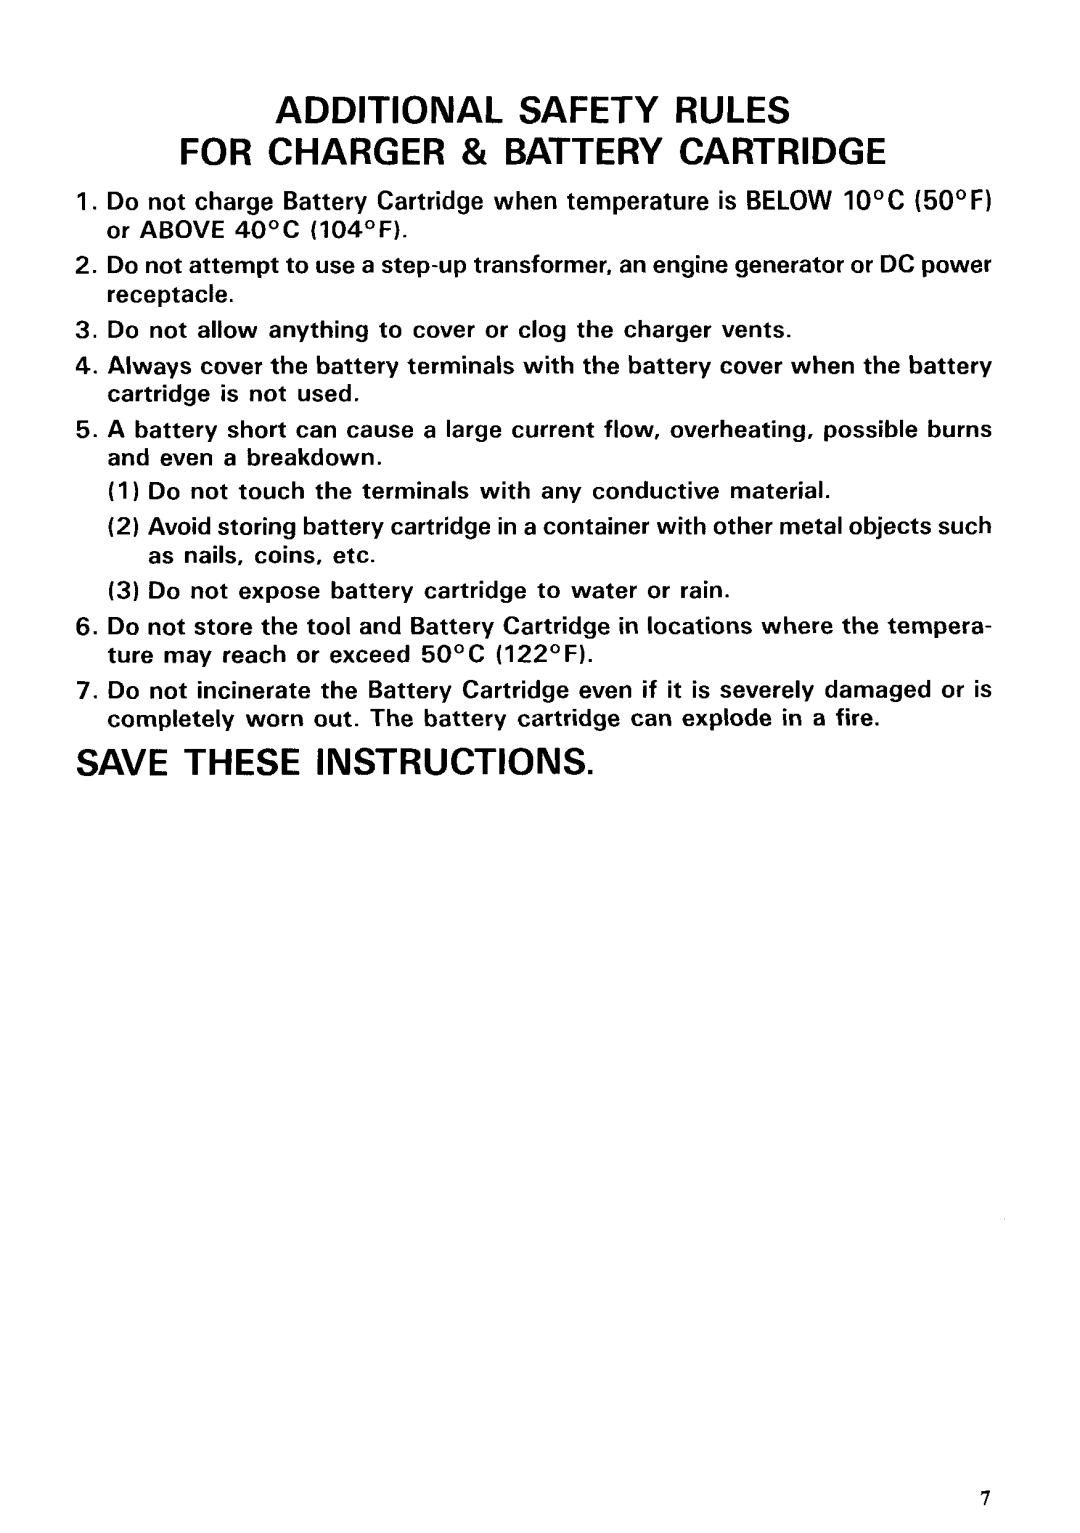 Makita 6203DWAE instruction manual Additional Safety Rules For Charger & Battery Cartridge, Save These Instructions 